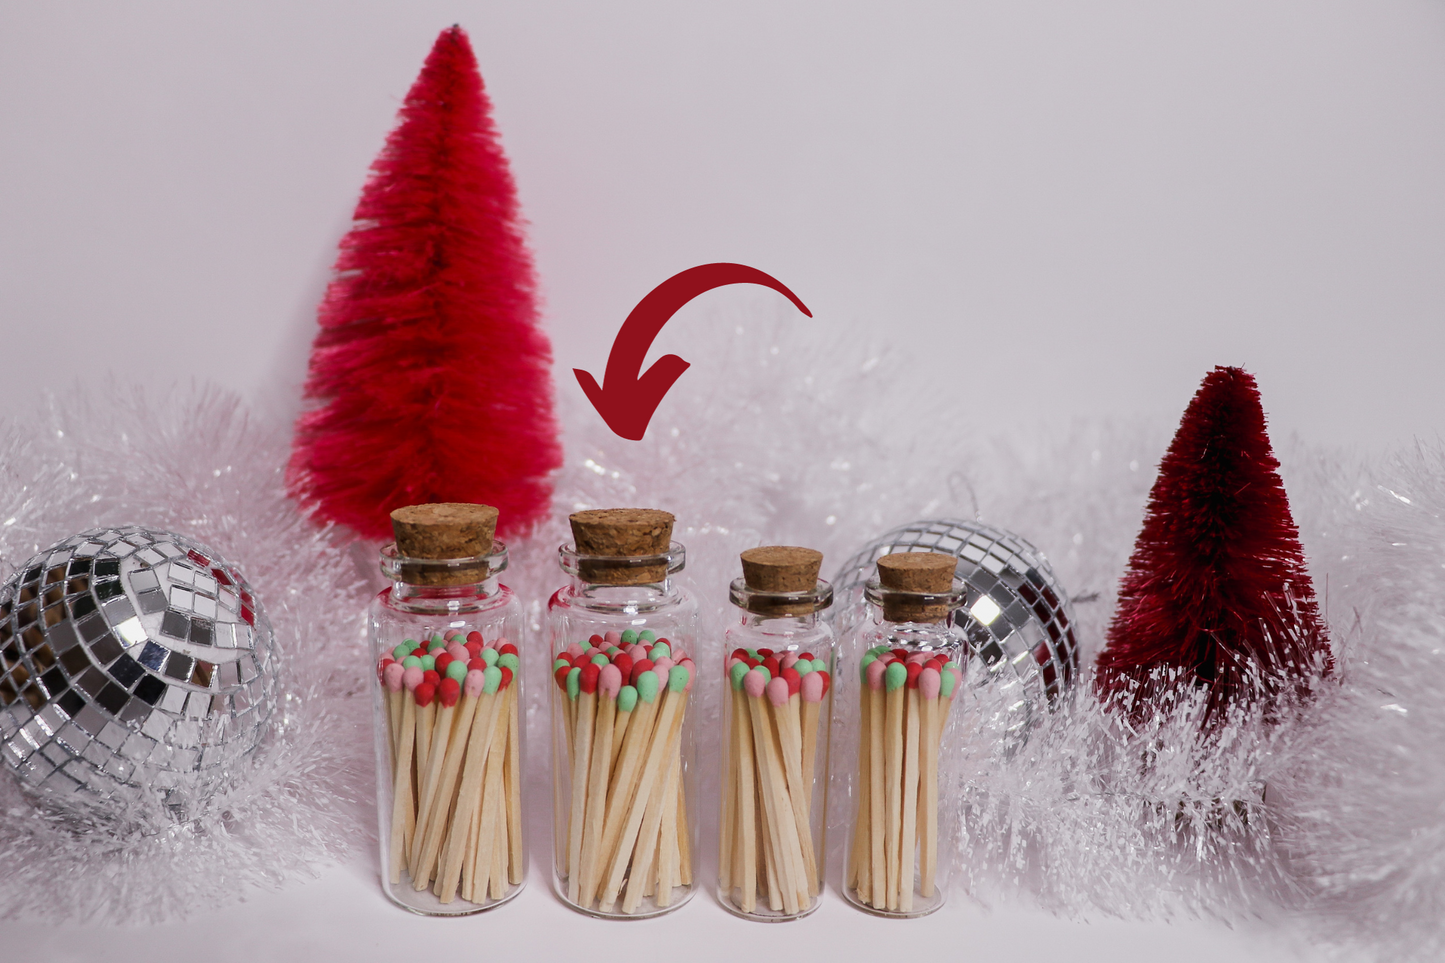 Kitschy Christmas Matches in Medium Corked Vial